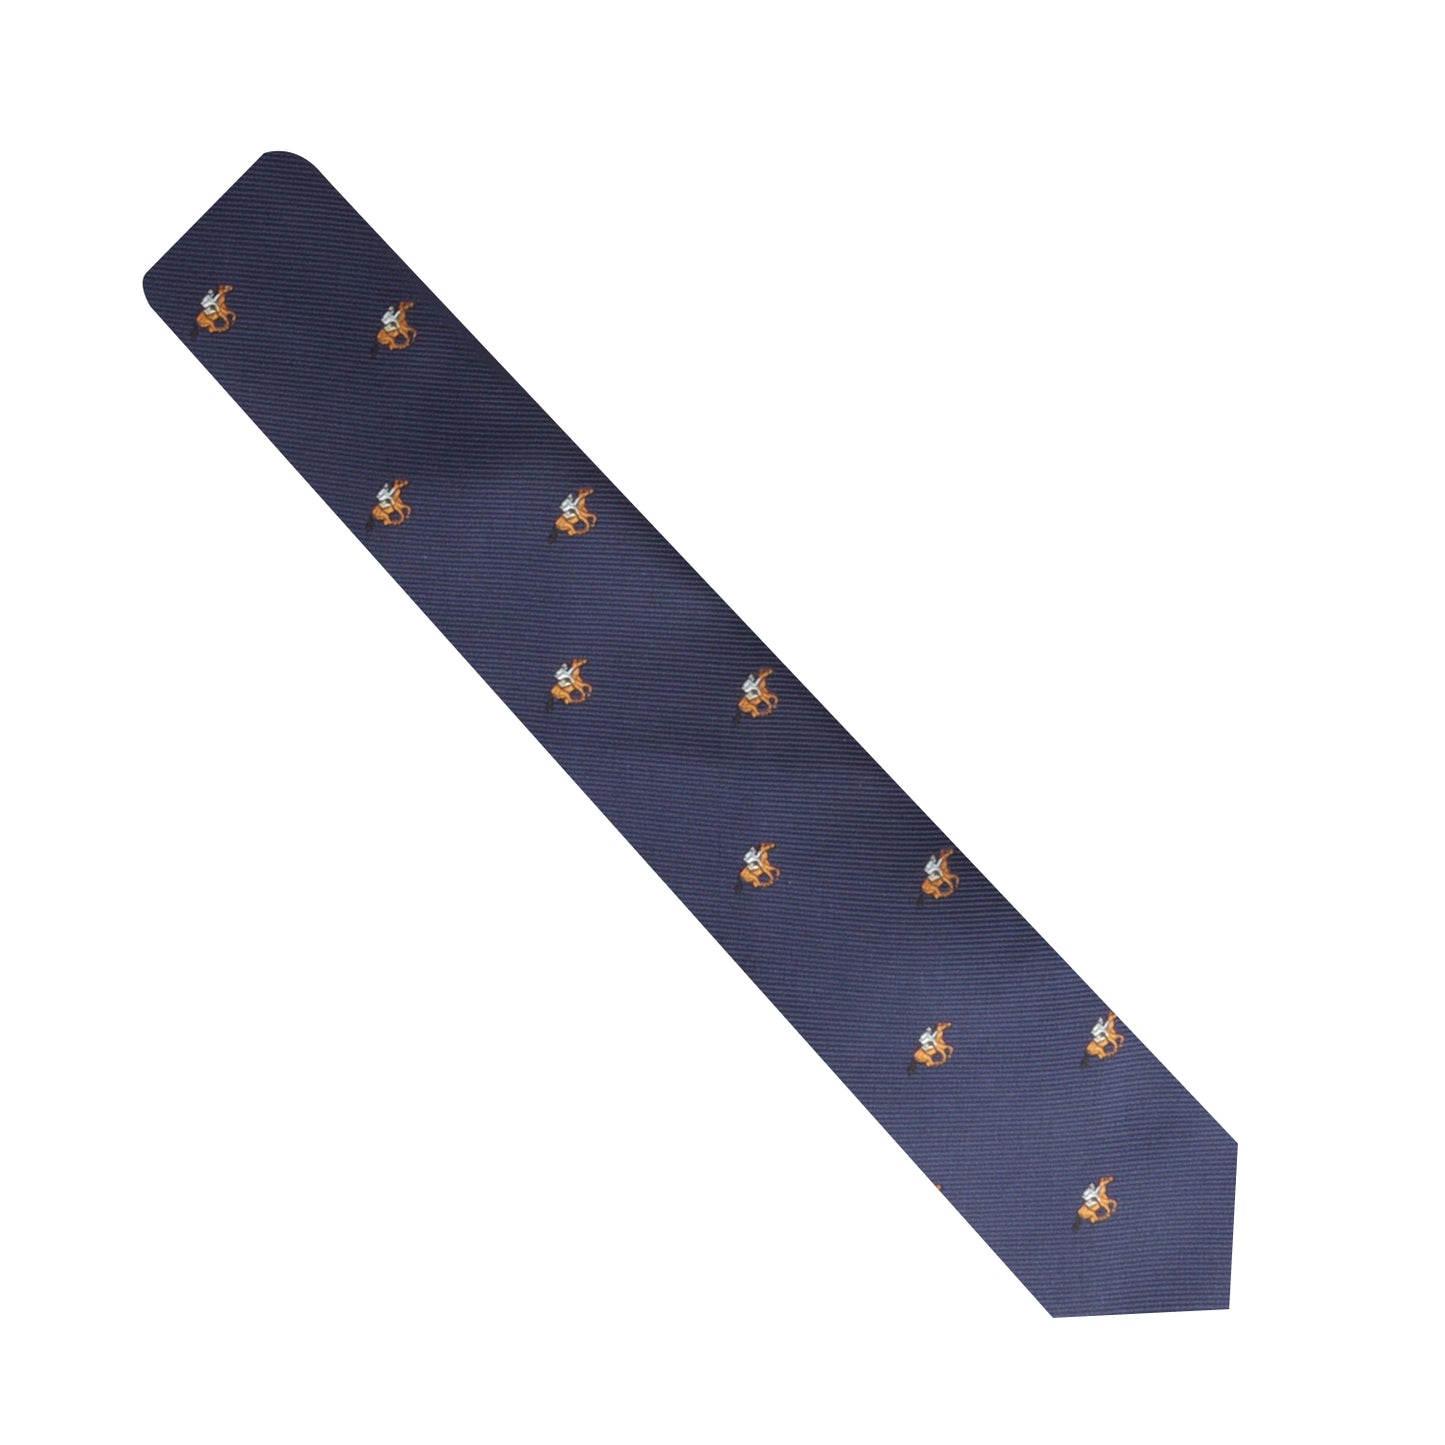 A dashing Horse Racing Skinny Tie with a galloping fox on it, exuding elegance.